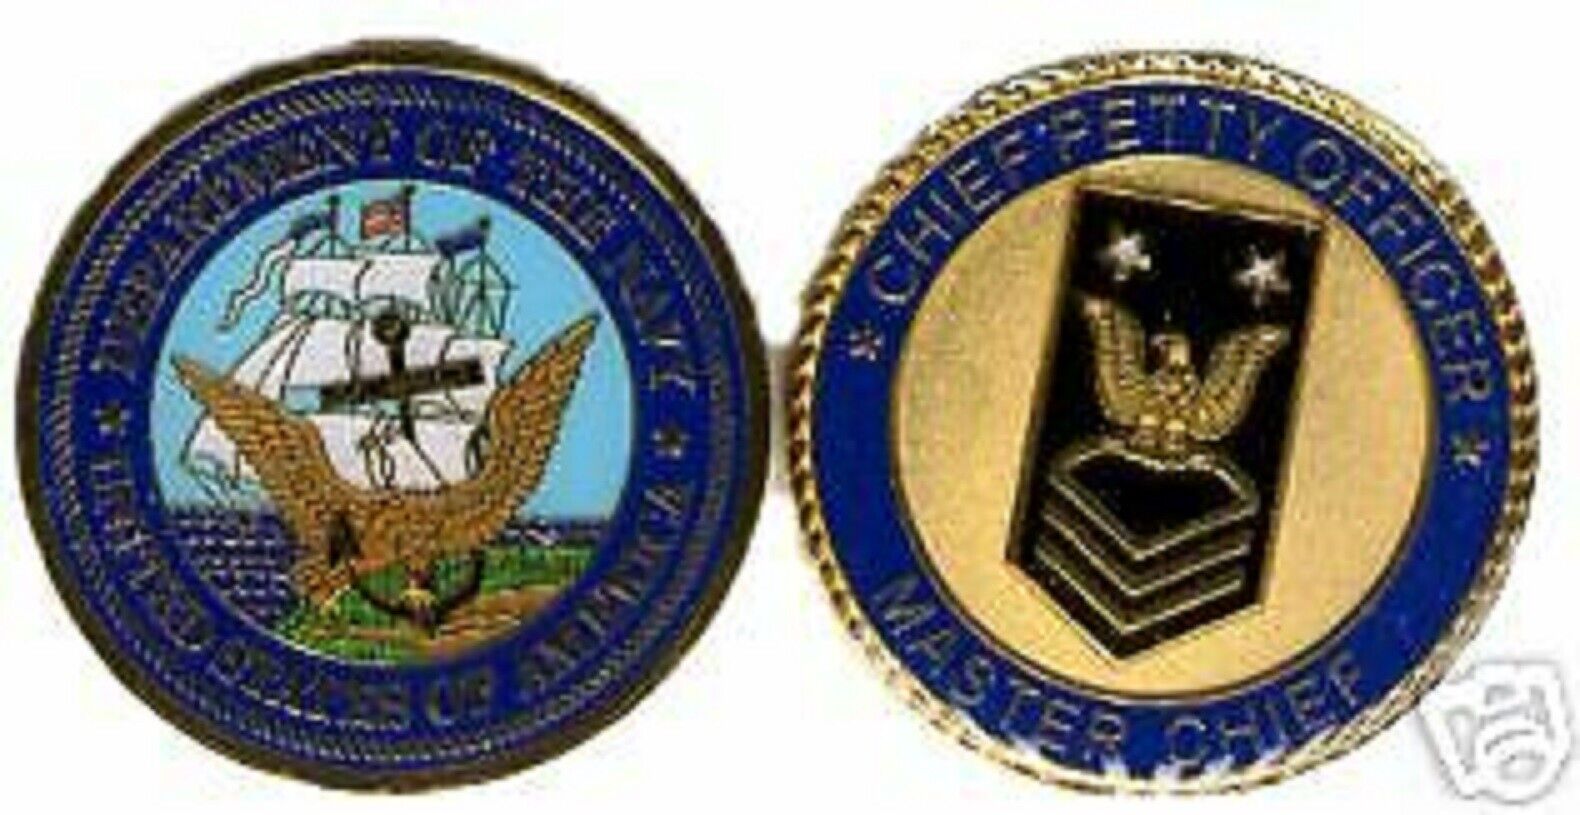 USN NAVY CPO MASTER CHIEF PETTY OFFICER CHALLENGE COIN